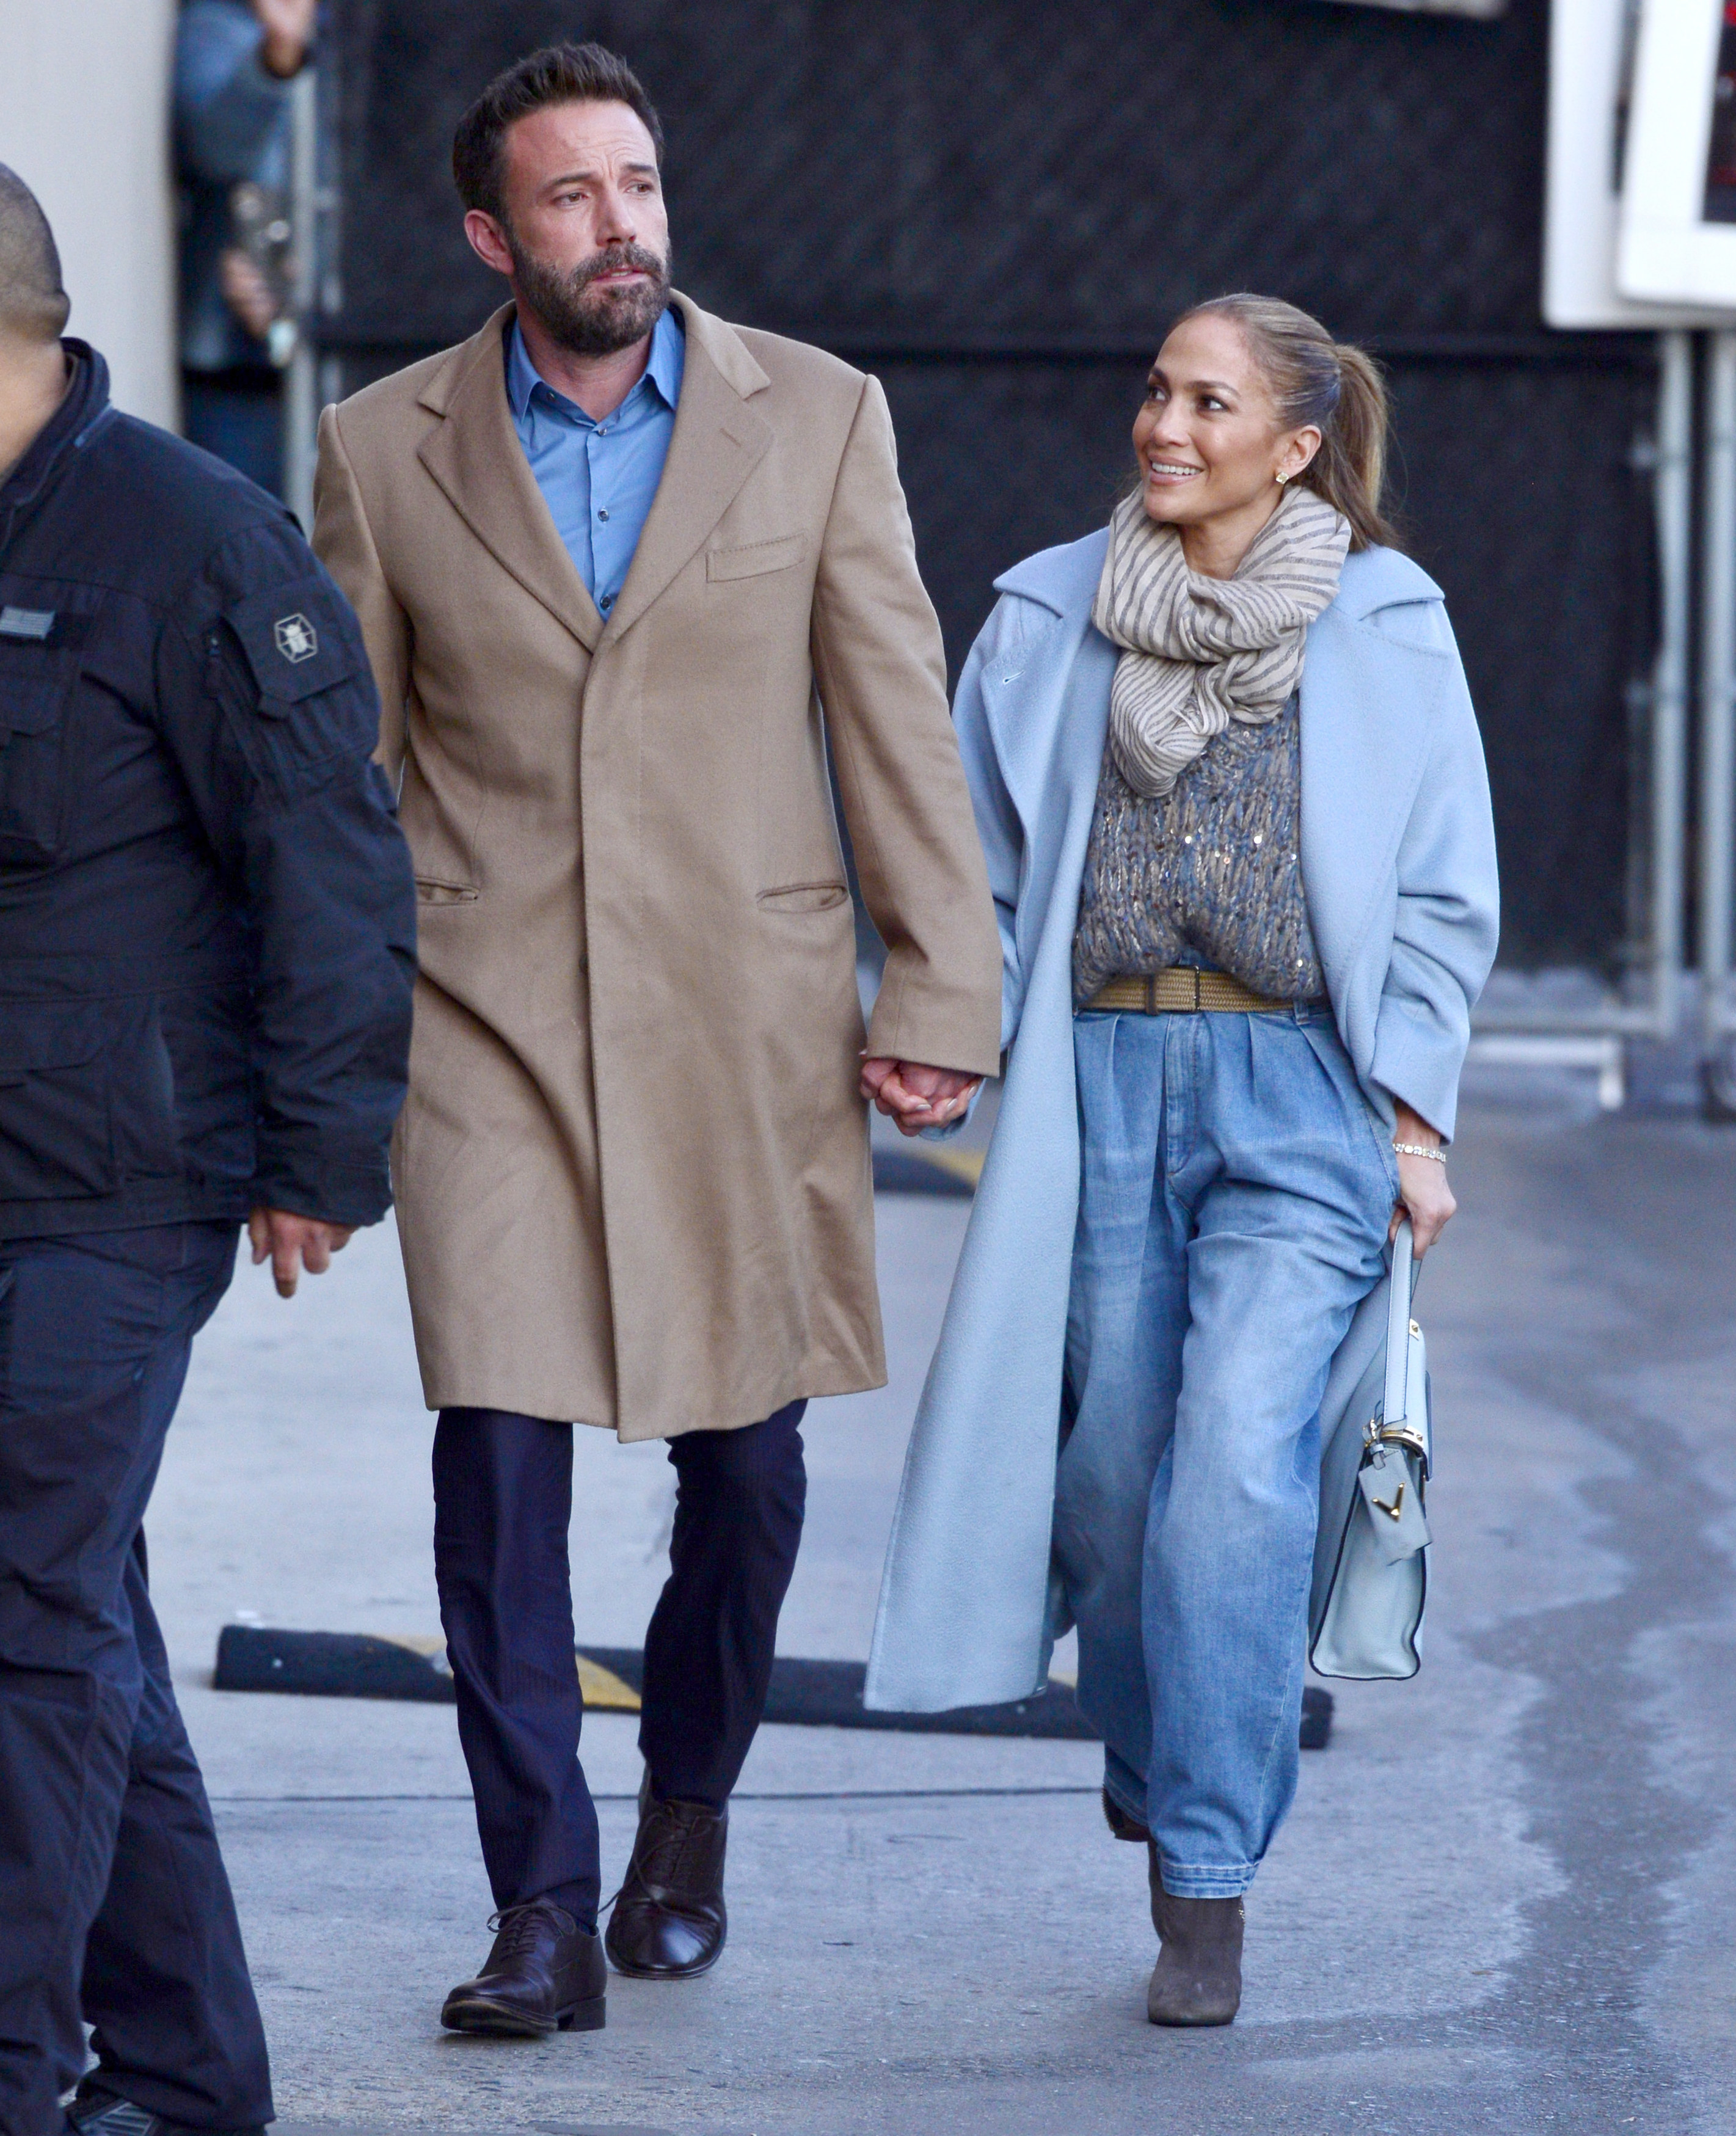 Ben and JLo on the street holding hands